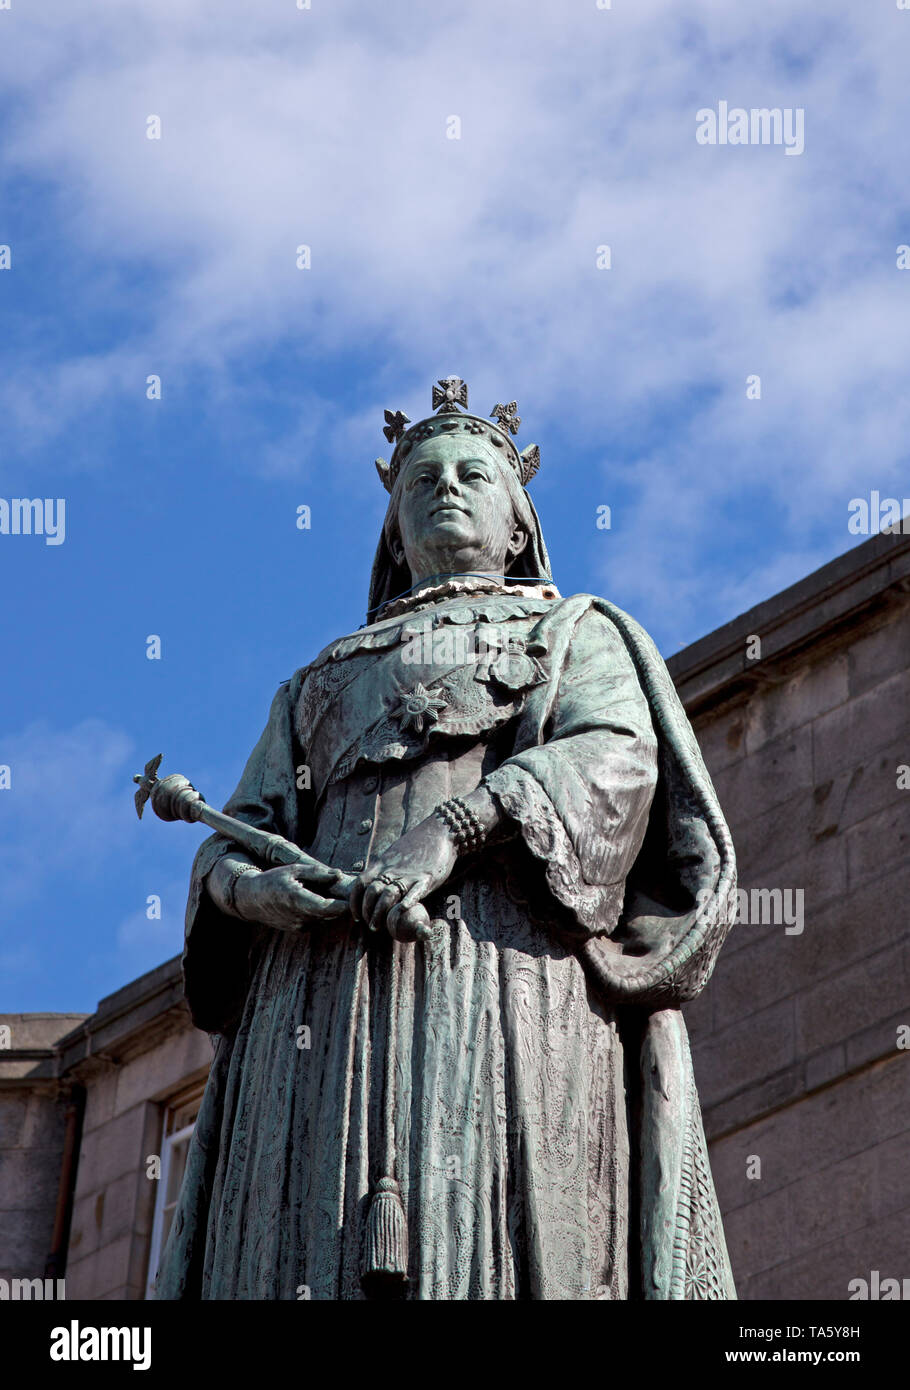 Leith, Edinburgh, UK. 22nd May 2019.  This year commemorates the 200th anniversary of the birth of Queen Victoria. This bronze statue situated at Foot of Leith Walk in front of what is now the New Kirkgate Shopping Centre. Sculpted by John Stevenson Rhind (Scottish, 1859 - 1937) unveiled by Lord Rosebery on 12th October 1907. Stock Photo